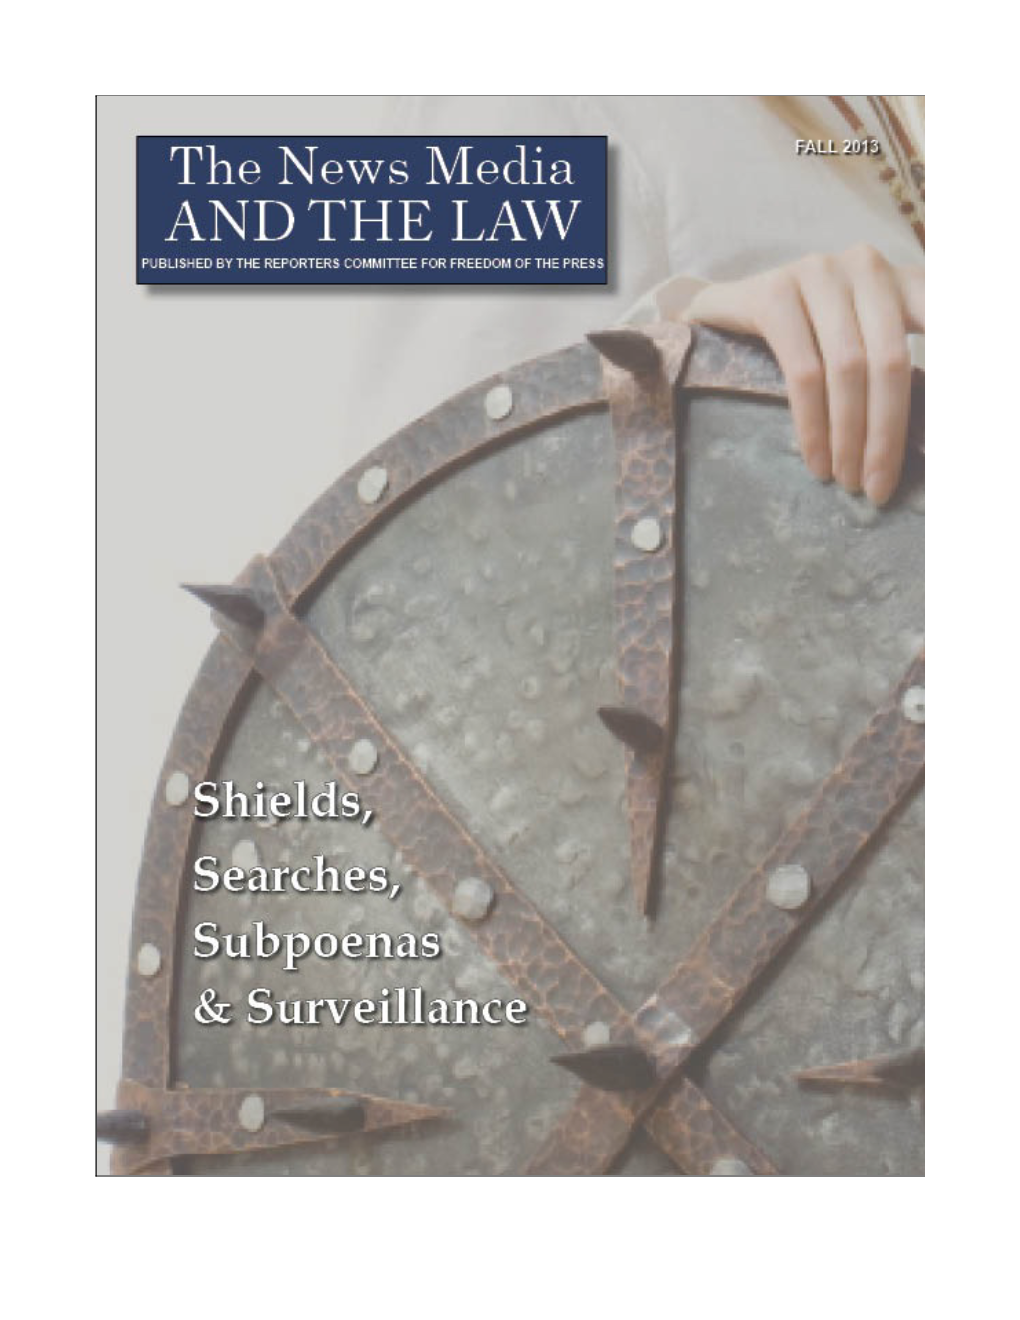 The News Media and the Law, Fall 2013